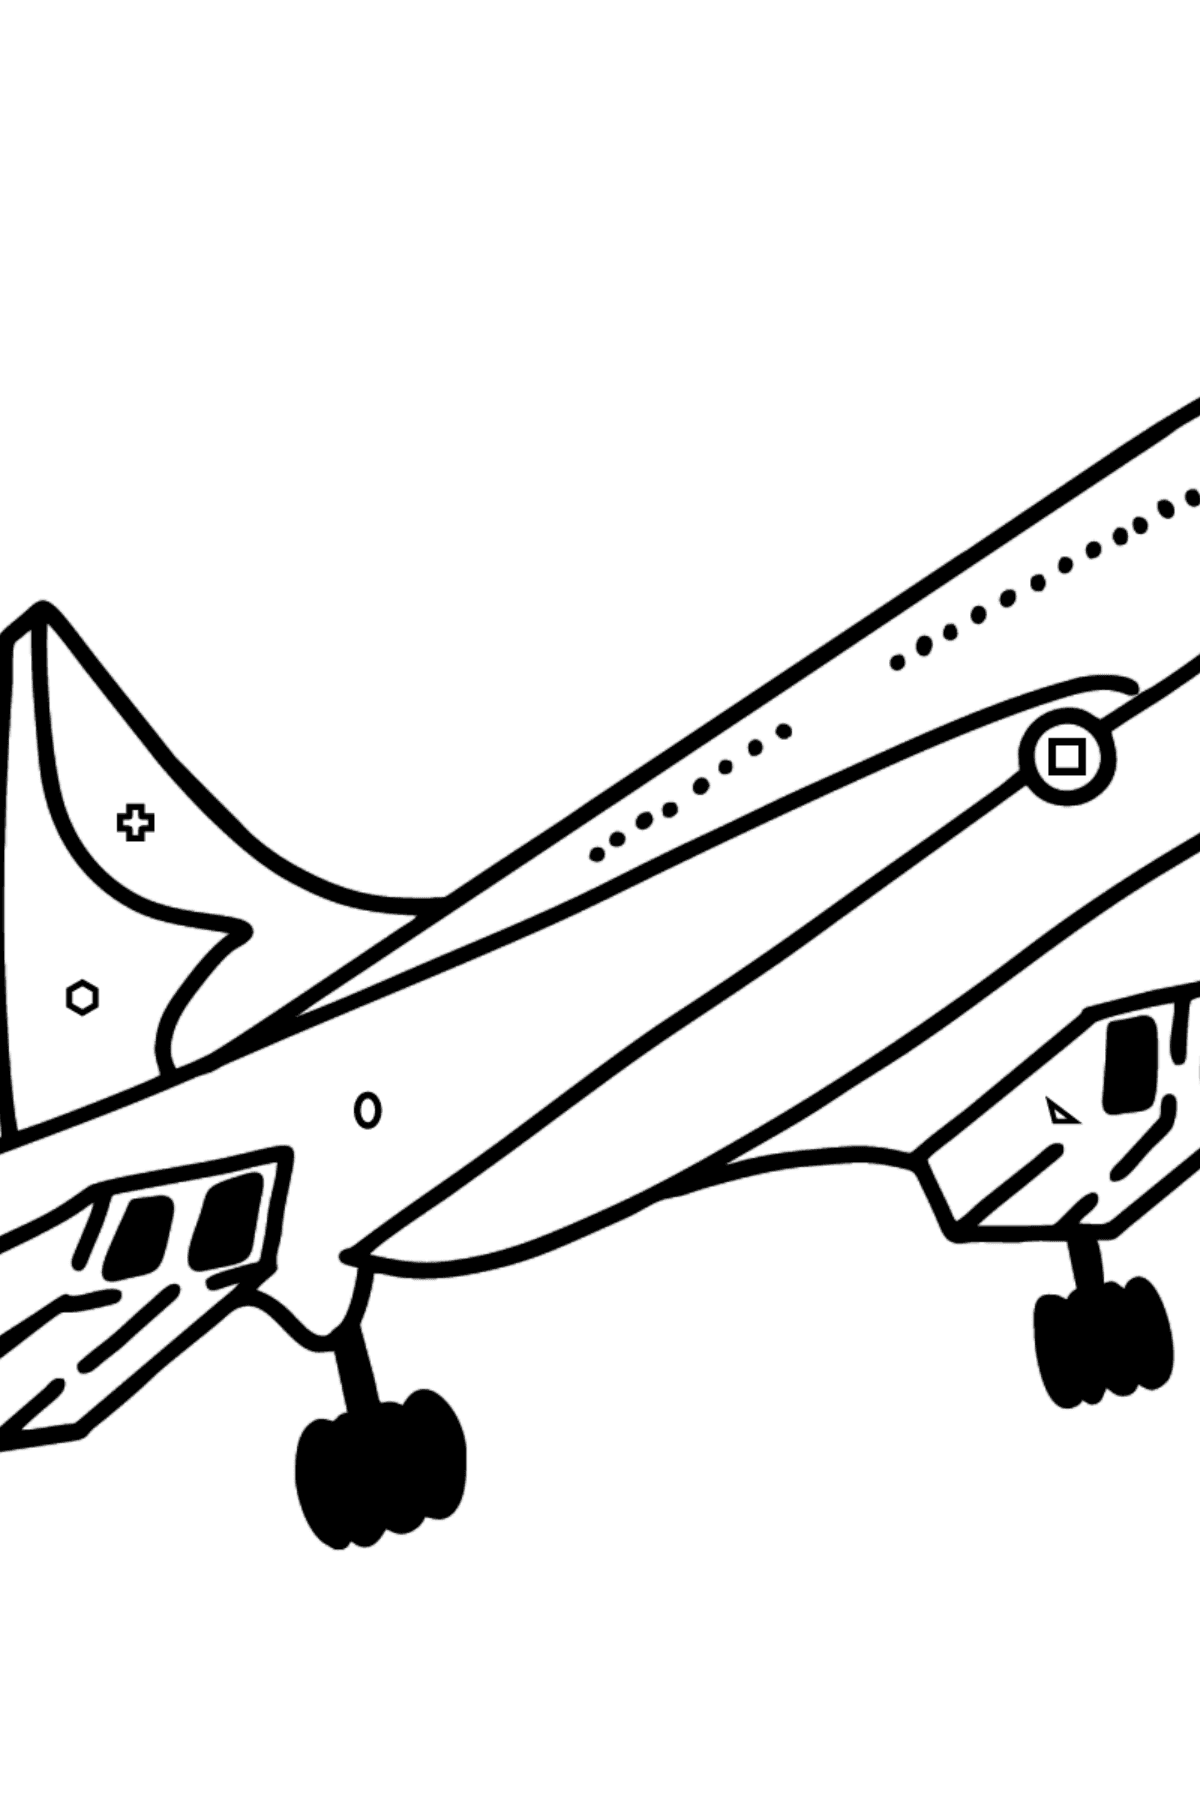 Concorde coloring page - Coloring by Geometric Shapes for Kids